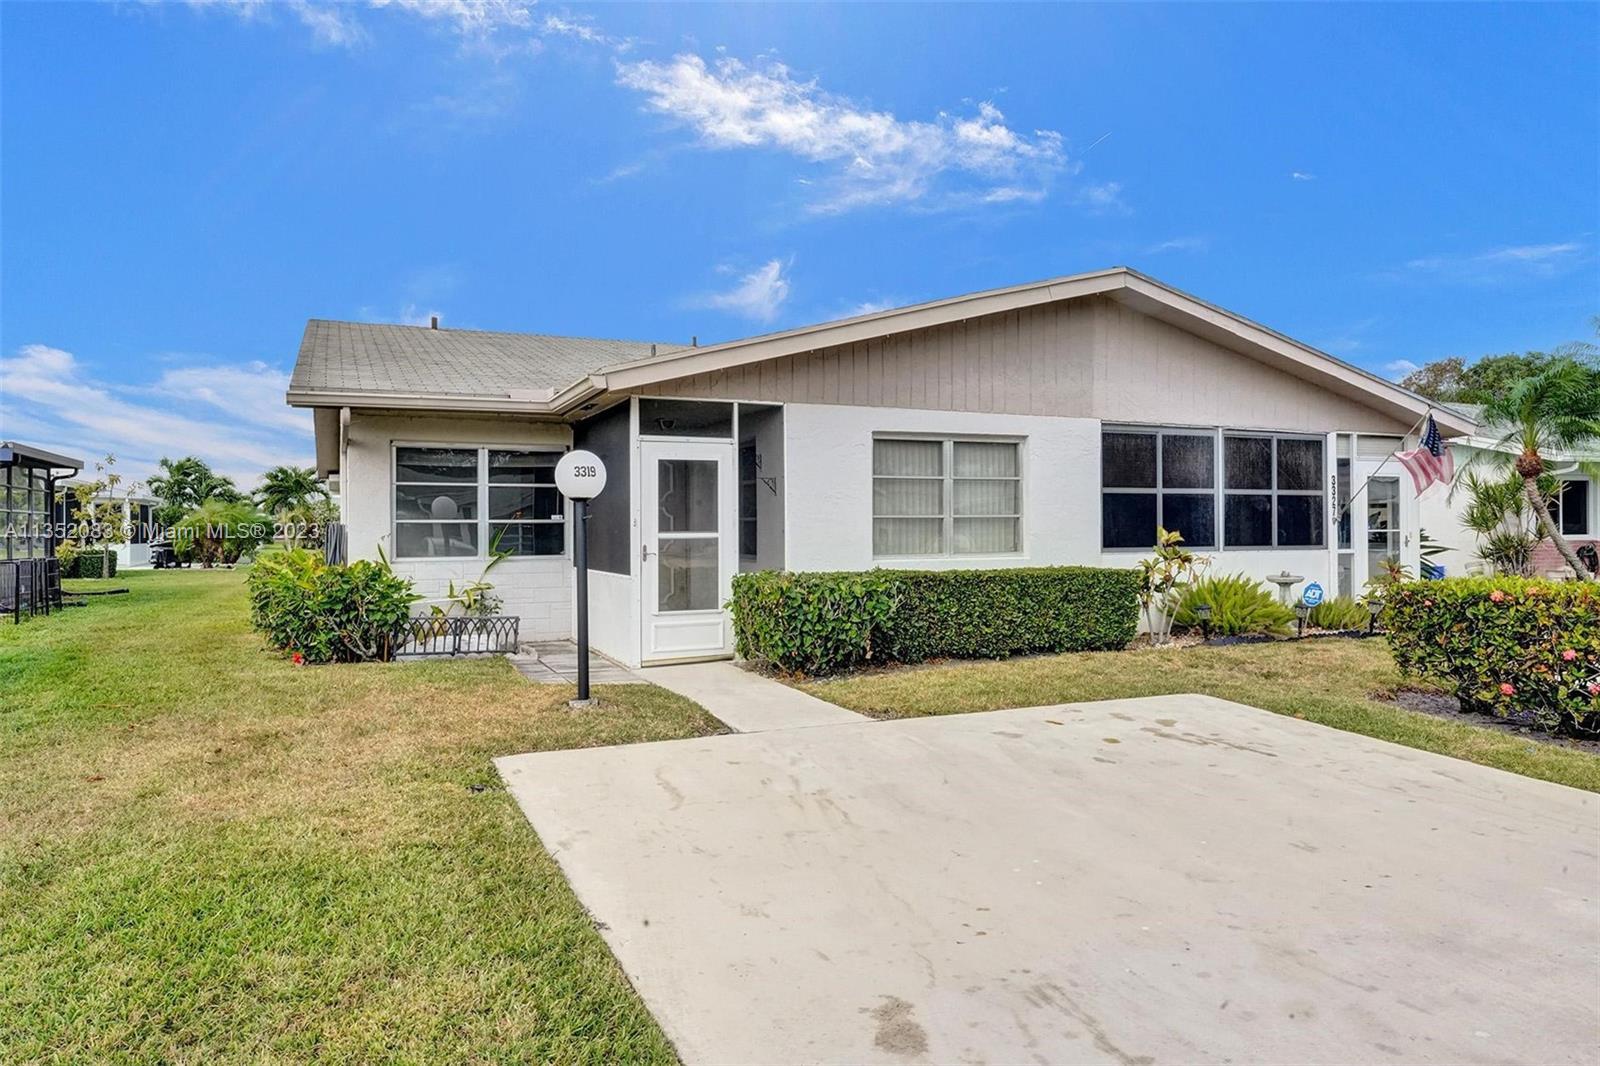 Bright & Airy, 2 Bedroom + Den/Office, 2 Bath ***LAKEFRONT VILLA*** in Sought After Cypress Lakes Go